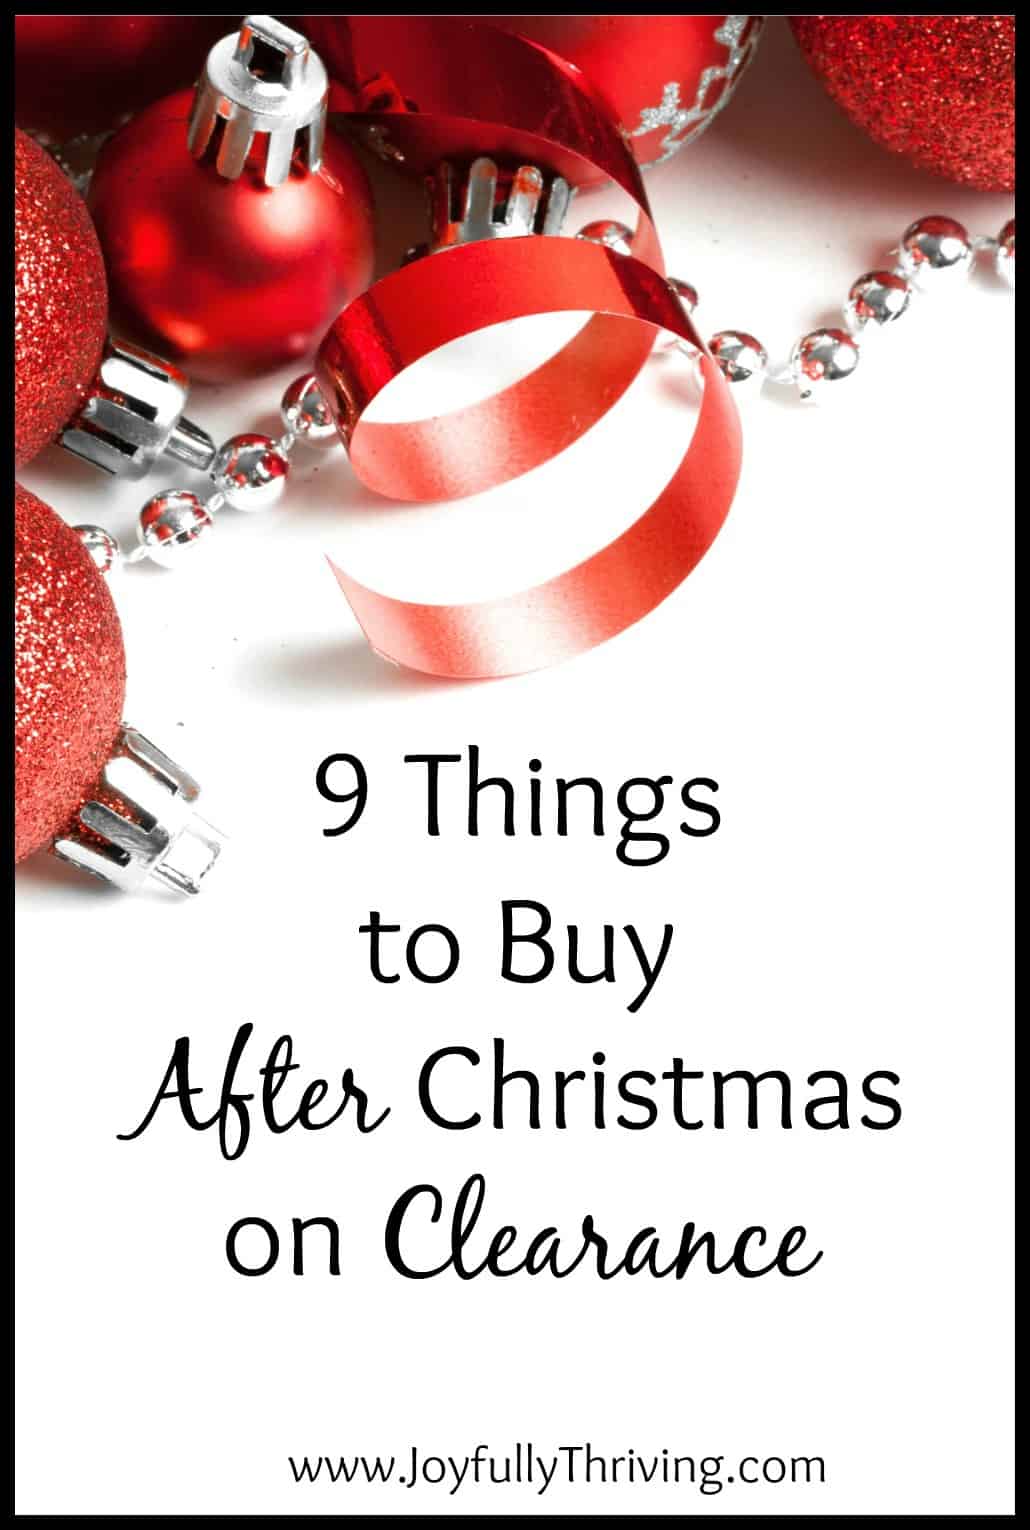 9 Things to Buy After Christmas on Clearance